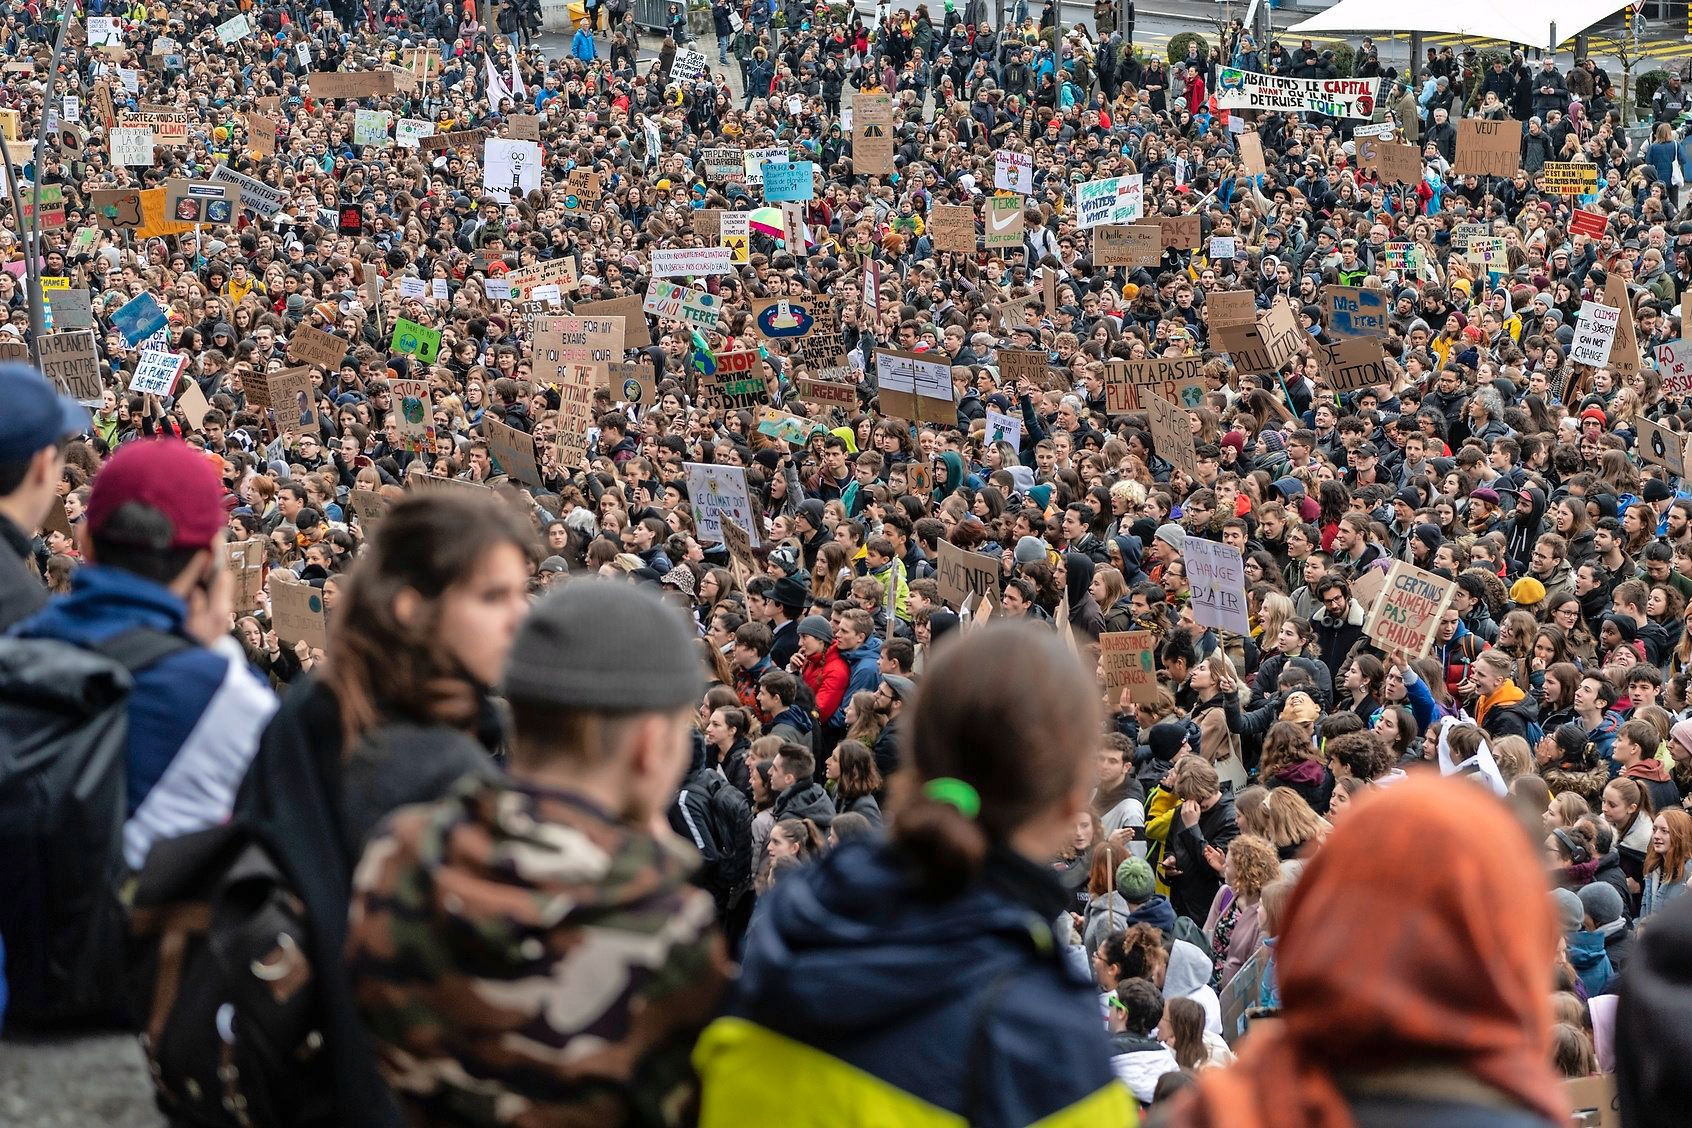 Thousands of students demonstrate during a "Climate strike" protest in Lausanne, Switzerland, Friday, March 15, 2019. Students from several countries worldwide plan to skip class Friday in protest over their governments' failure to act against global warming. (KEYSTONE/Jean-Christophe Bott) SCHWEIZ KLIMASCHUTZ DEMONSTRATION